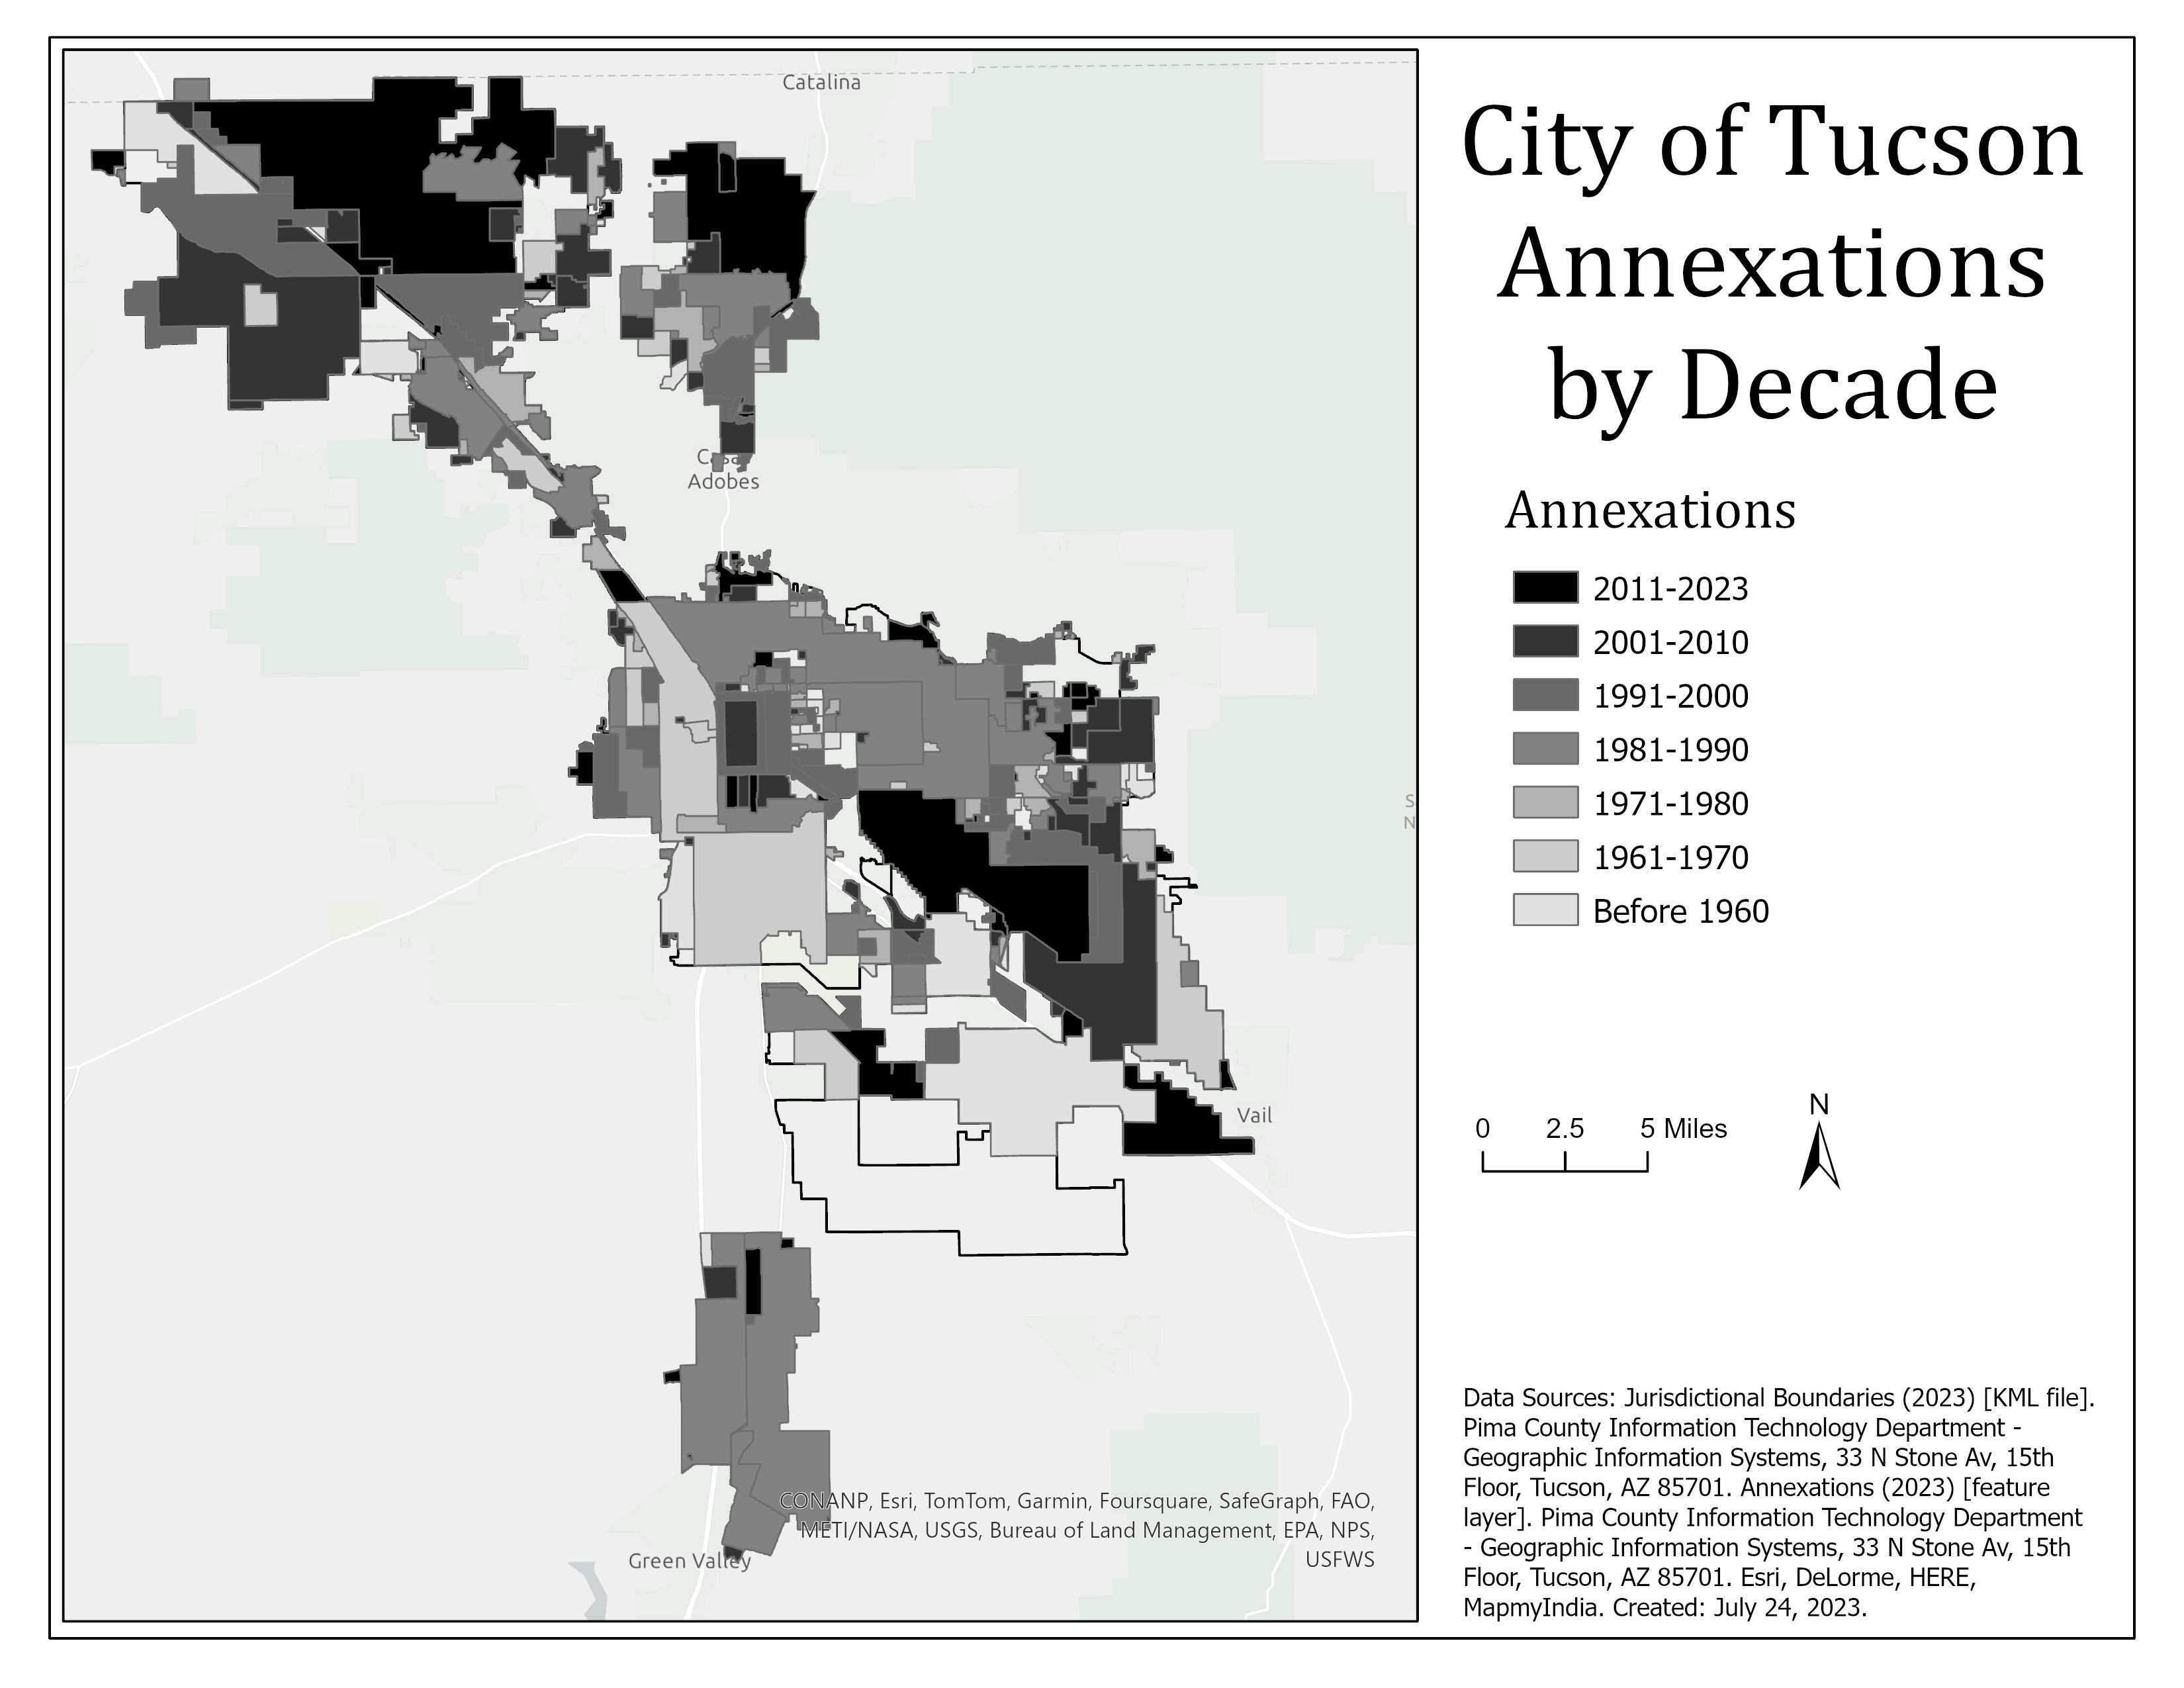 City of Tucson Annexations by Decade